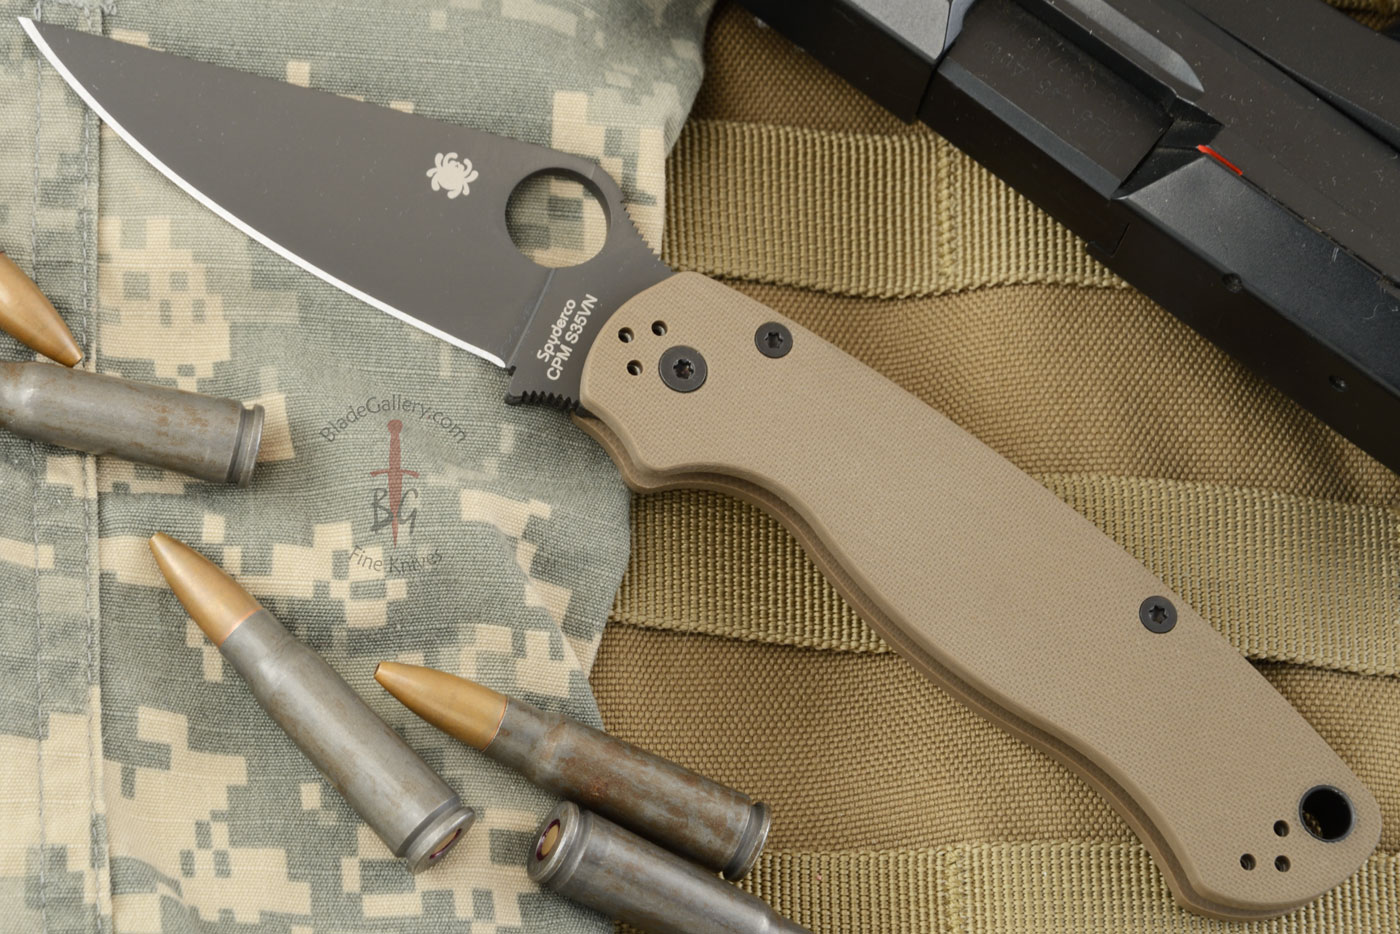 Paramilitary 2 with S35VN and Earth Brown G-10 (Sprint Run) - C81GPBNBK2